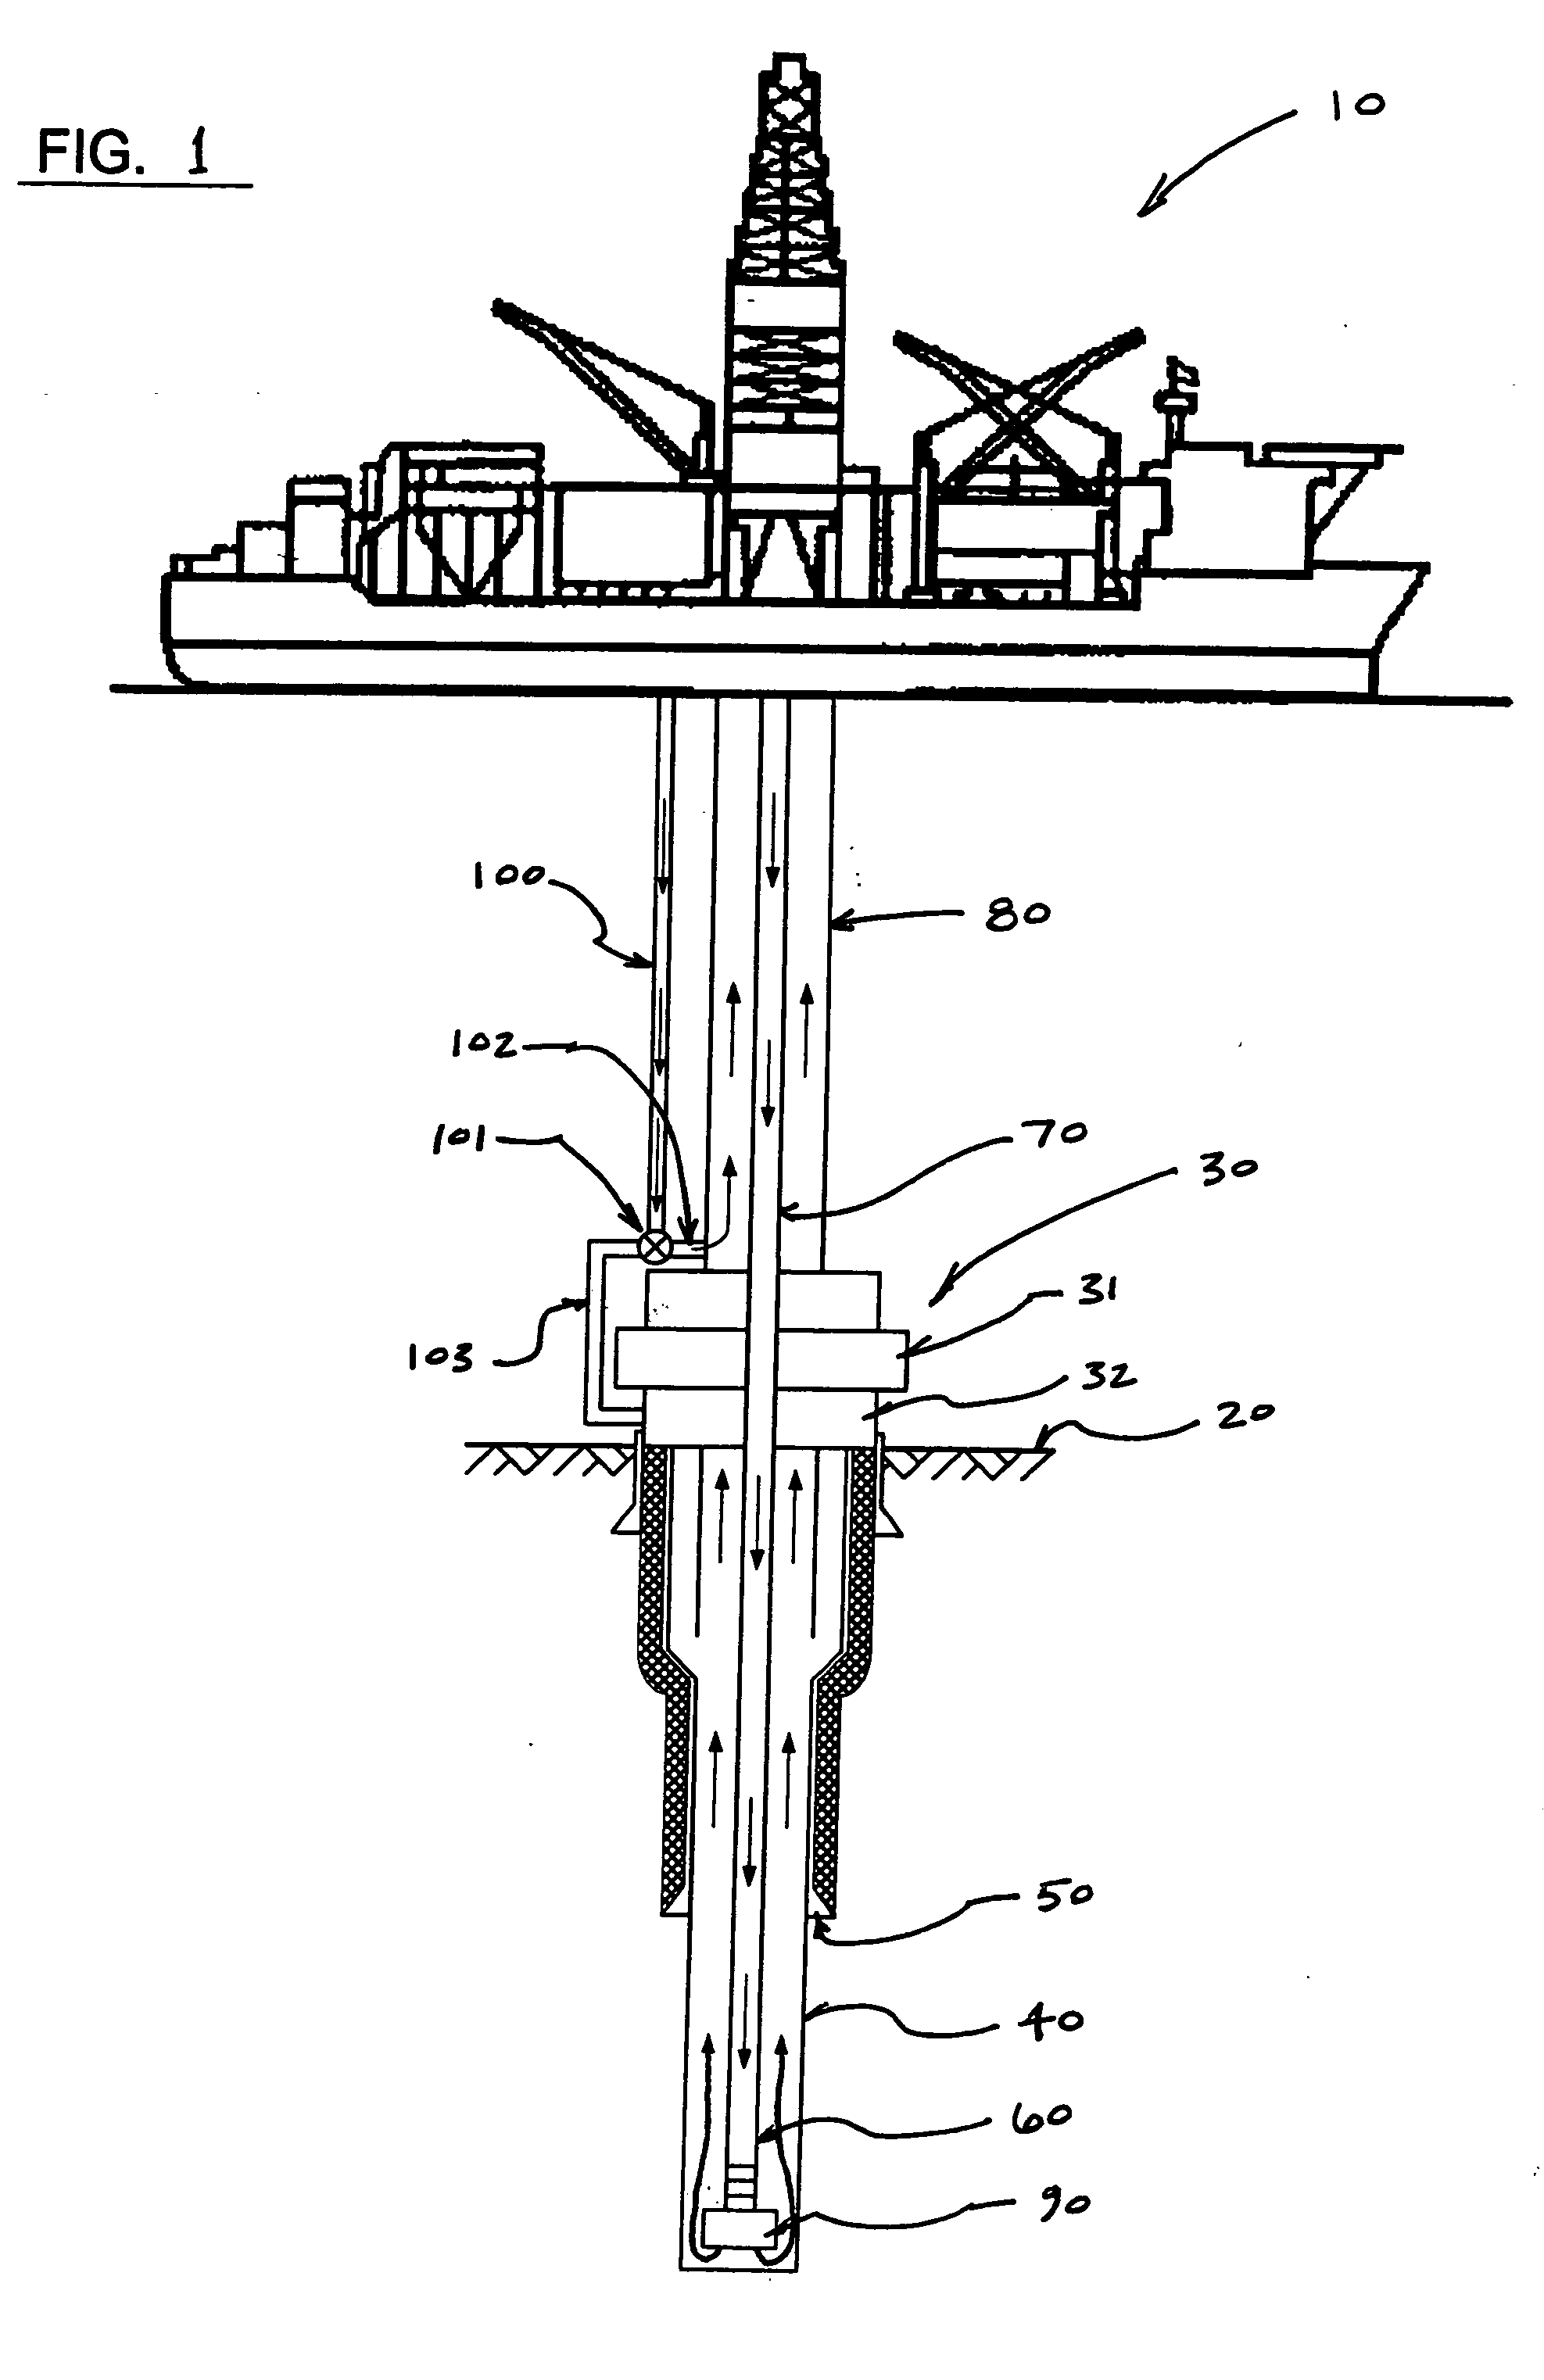 Method for varying the density of drilling fluids in deep water oil and gas drilling applications